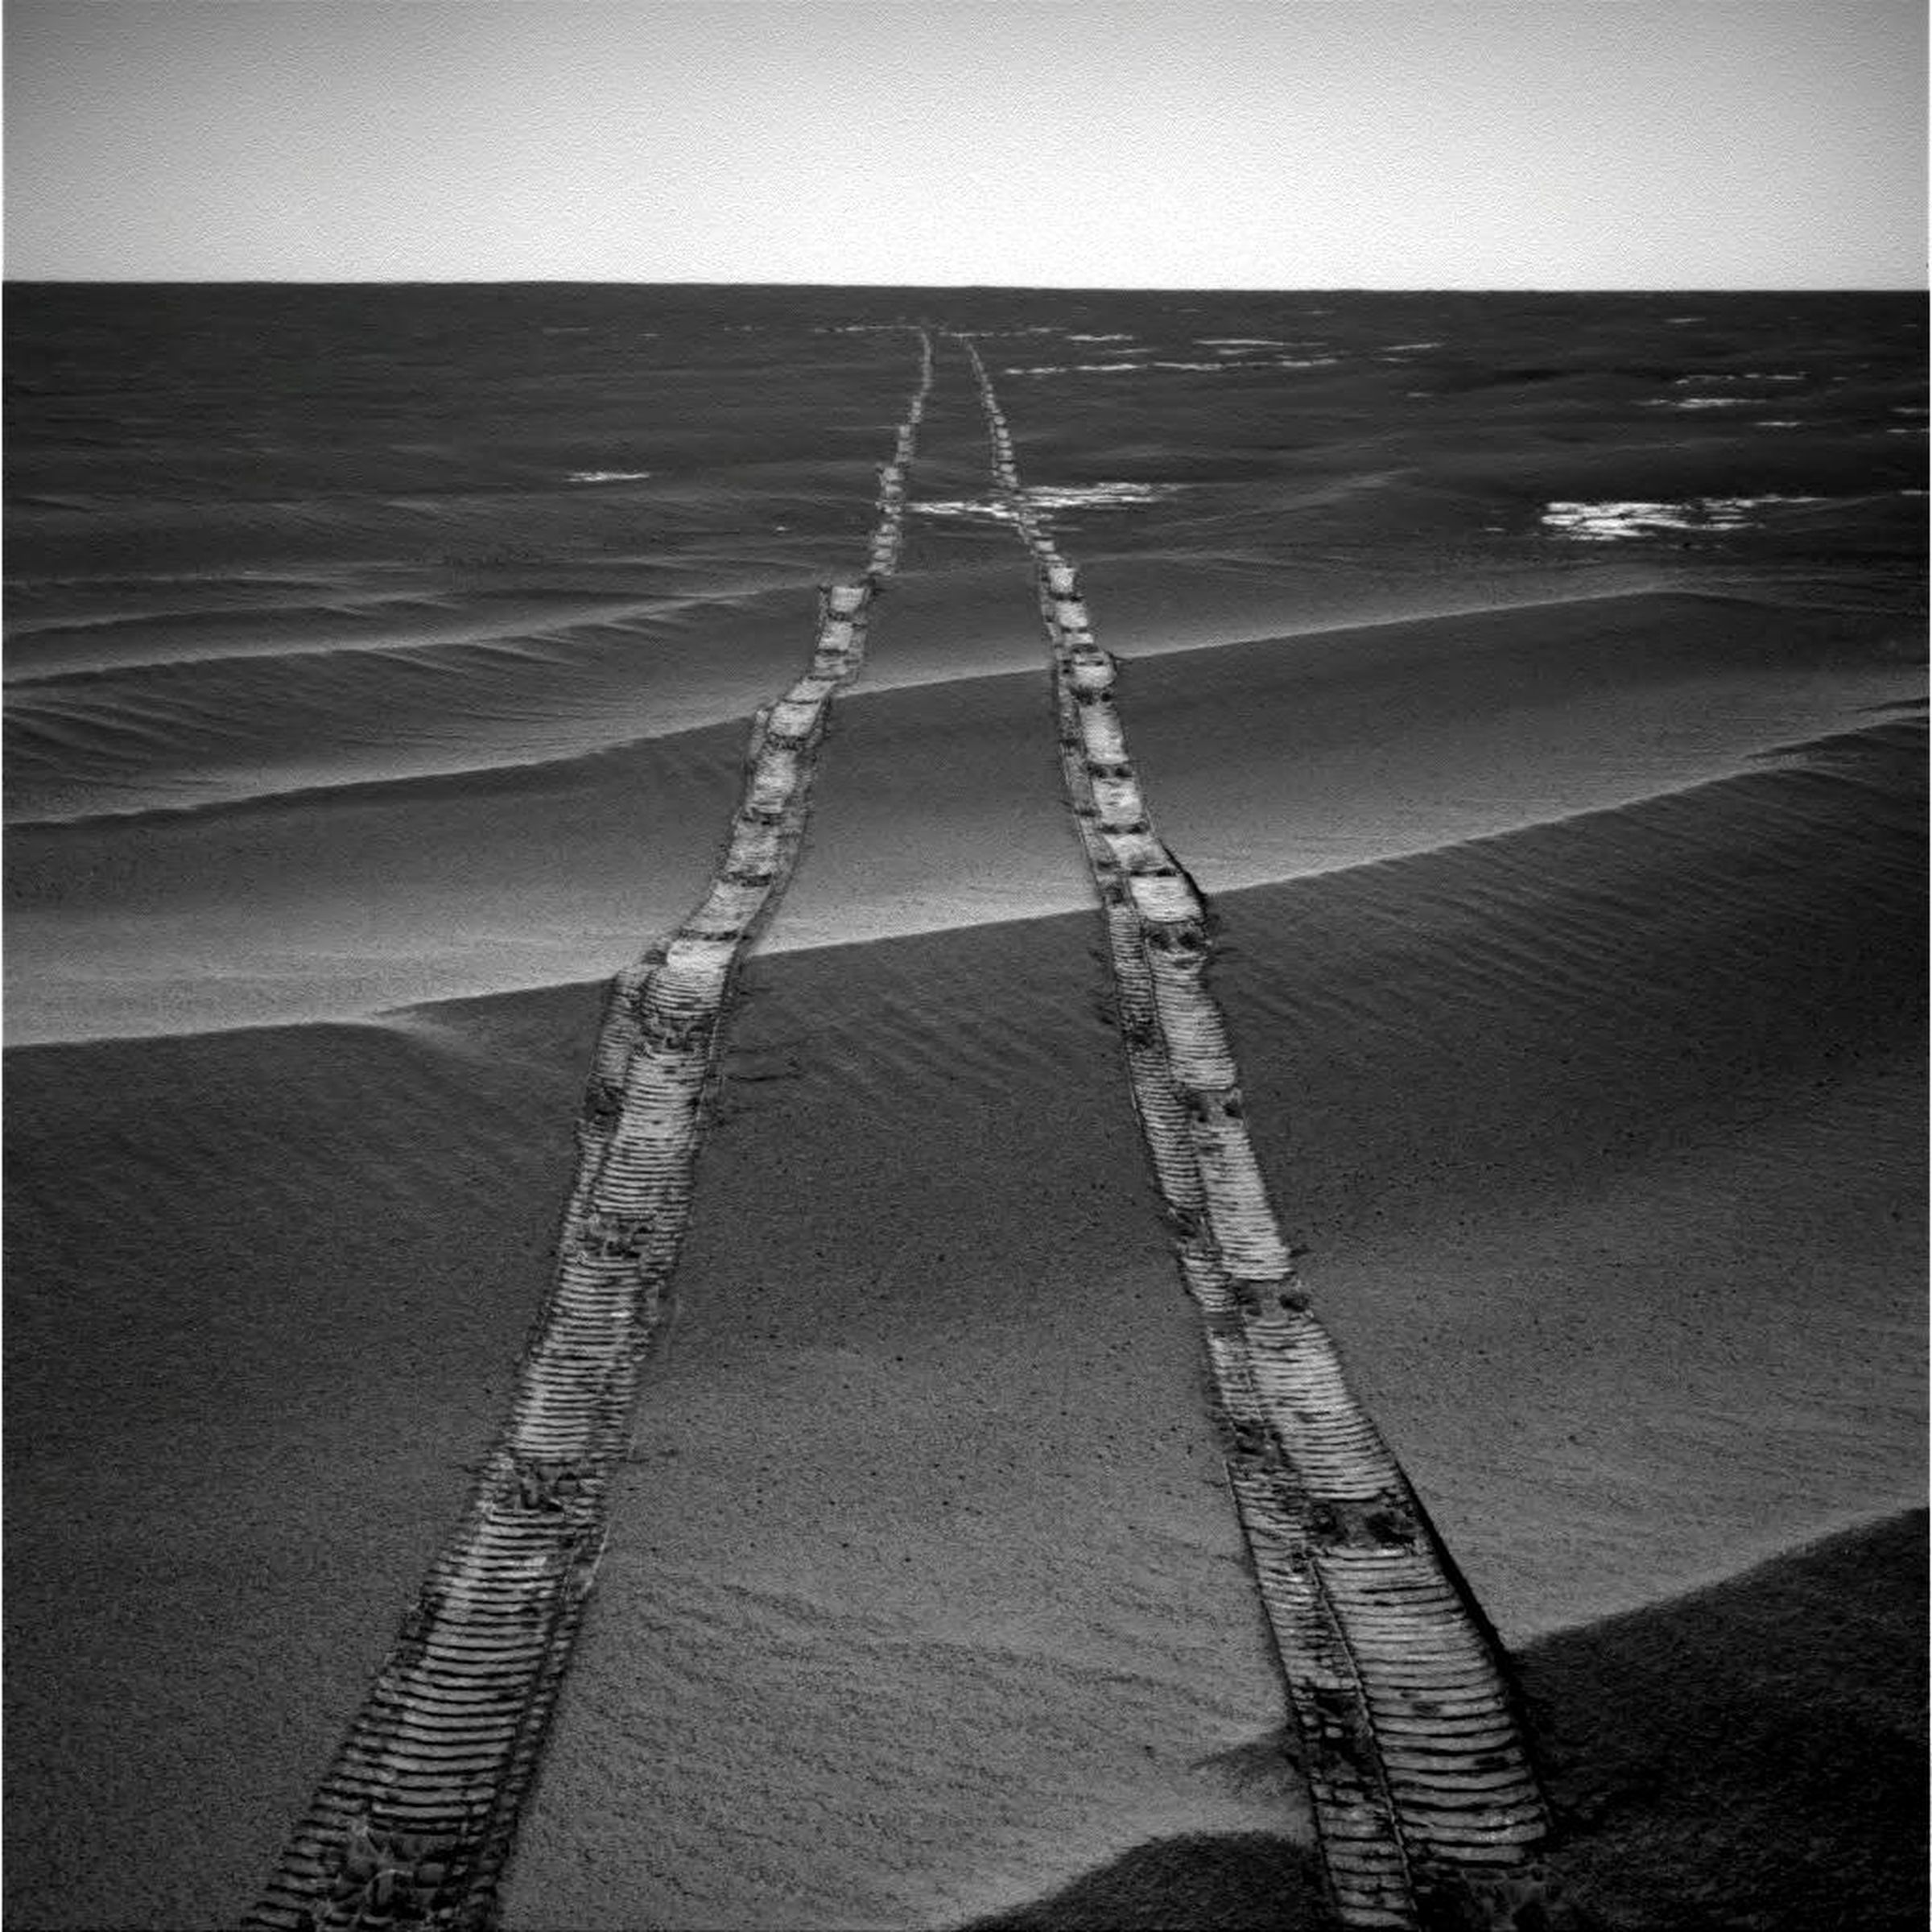 In this 2010 picture, Opportunity is about six years into its originally slated 90-day mission. Its navigation camera captured a snippet of its already long trek across the landscape. It would keep going on its journey for another eight years.